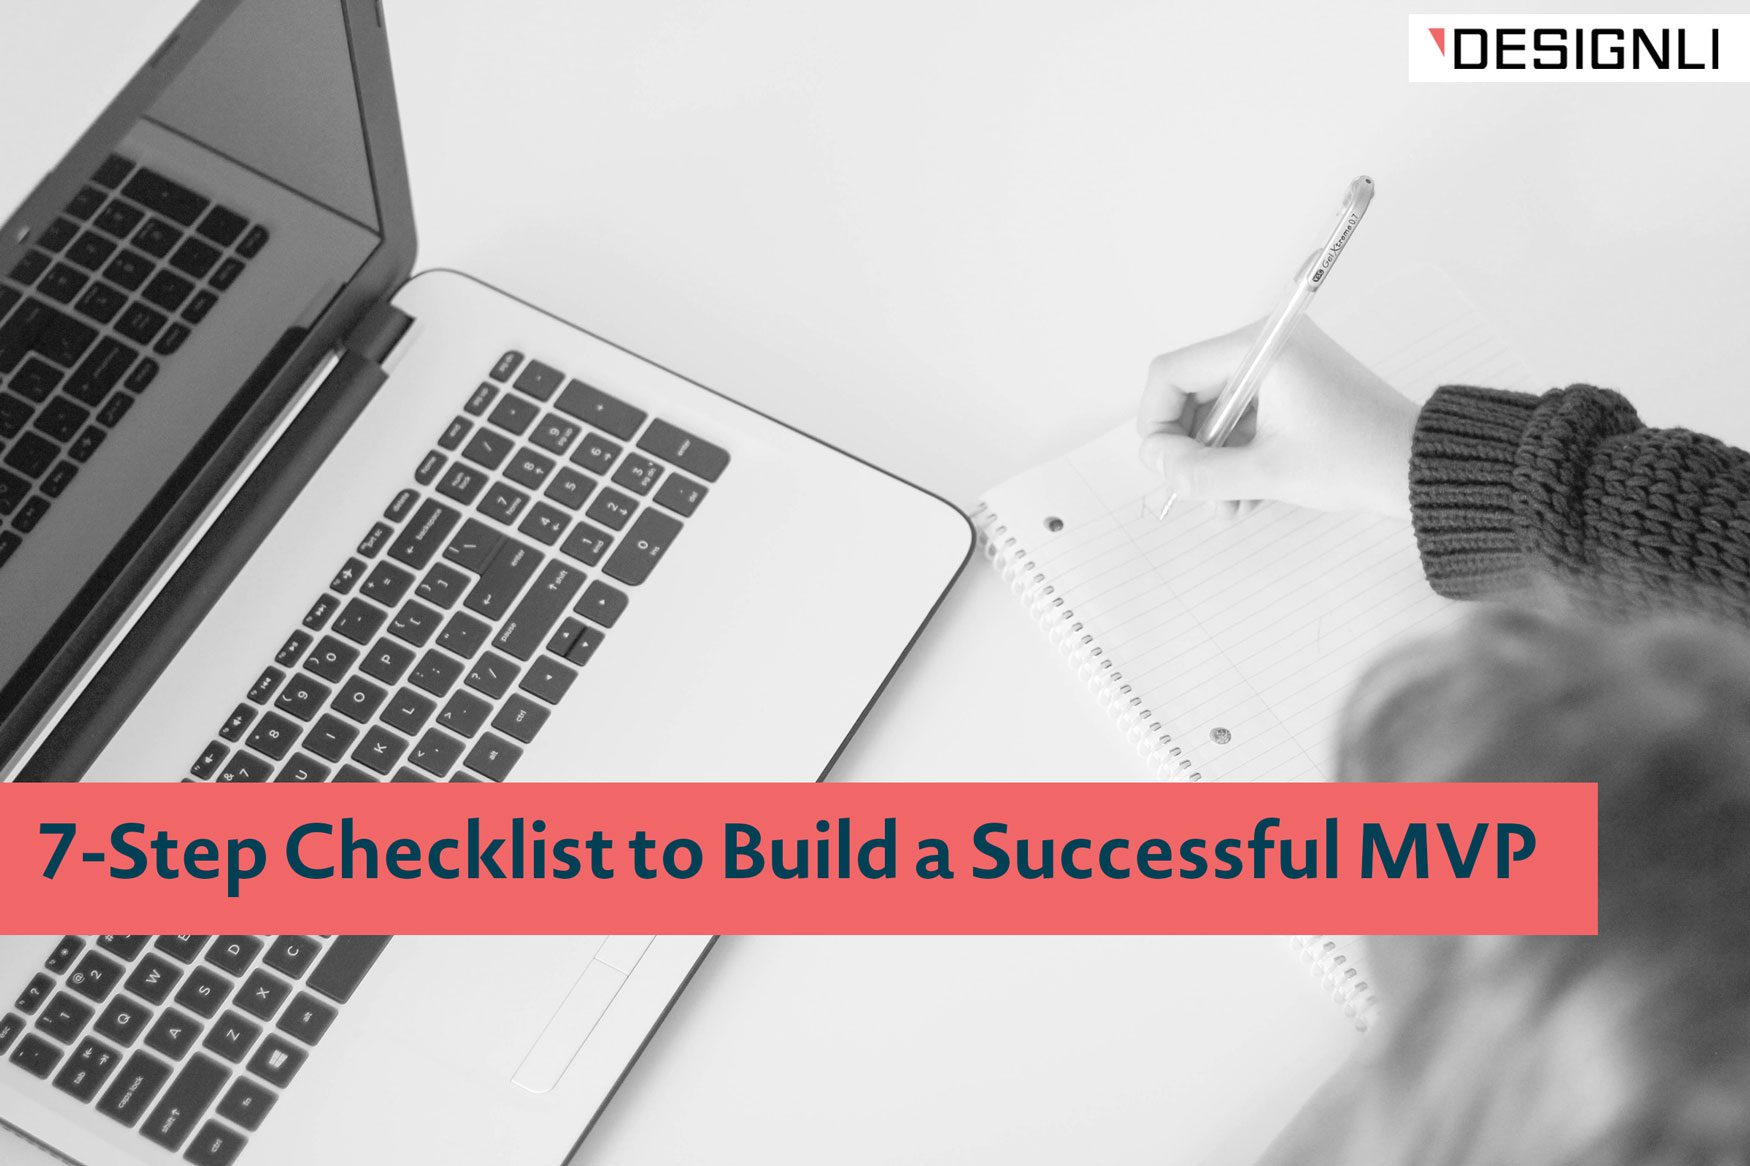 7-Step Checklist to Build a Successful MVP